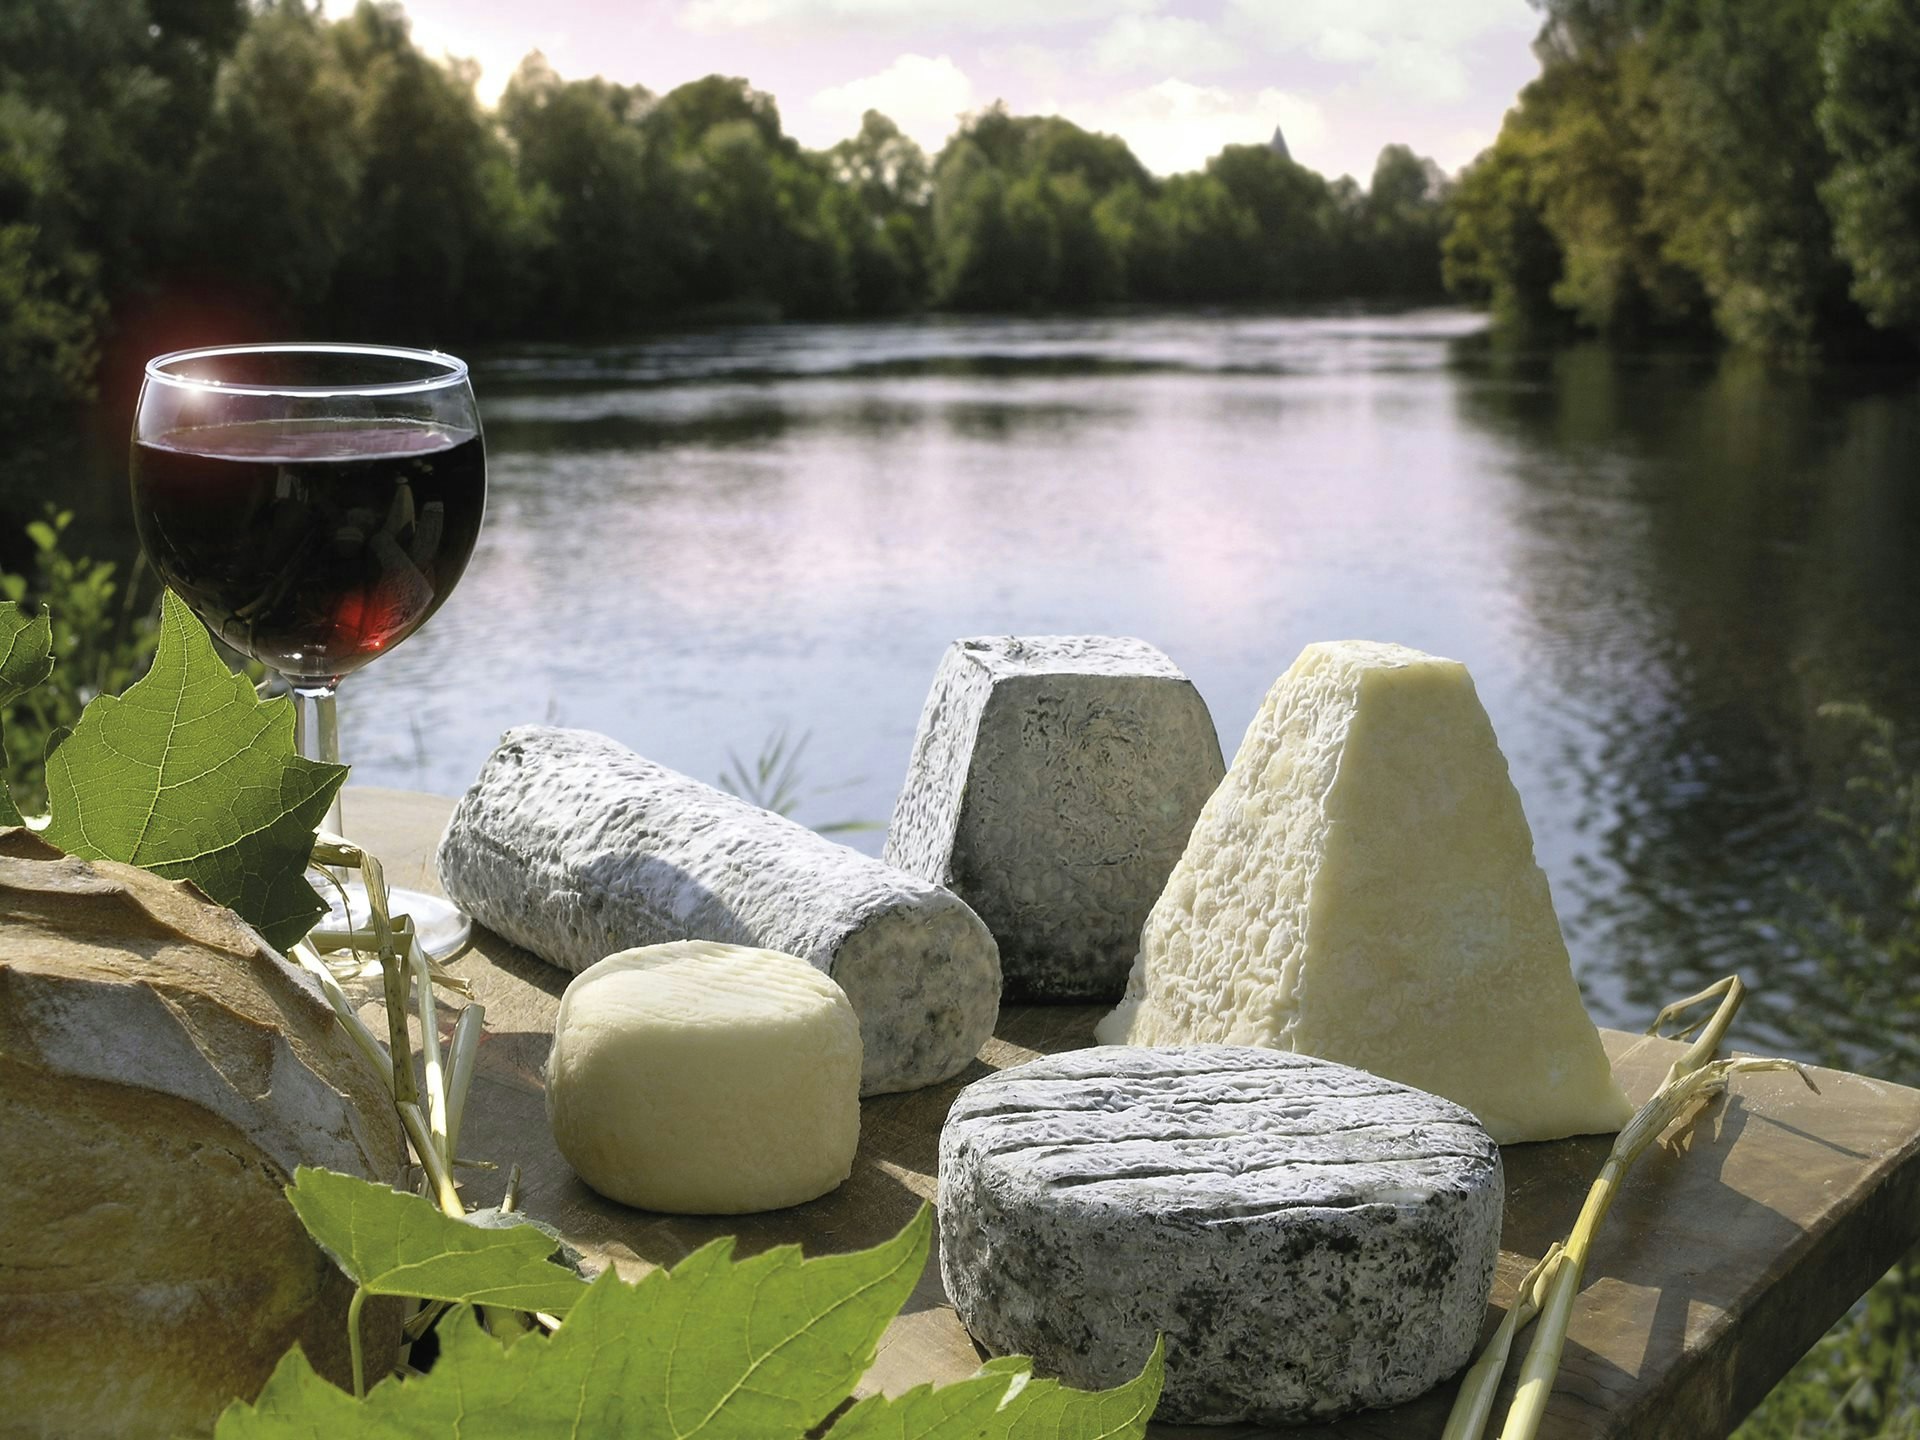 A selection of French cheeses and red wine with a view of the water channel, Burgundy.